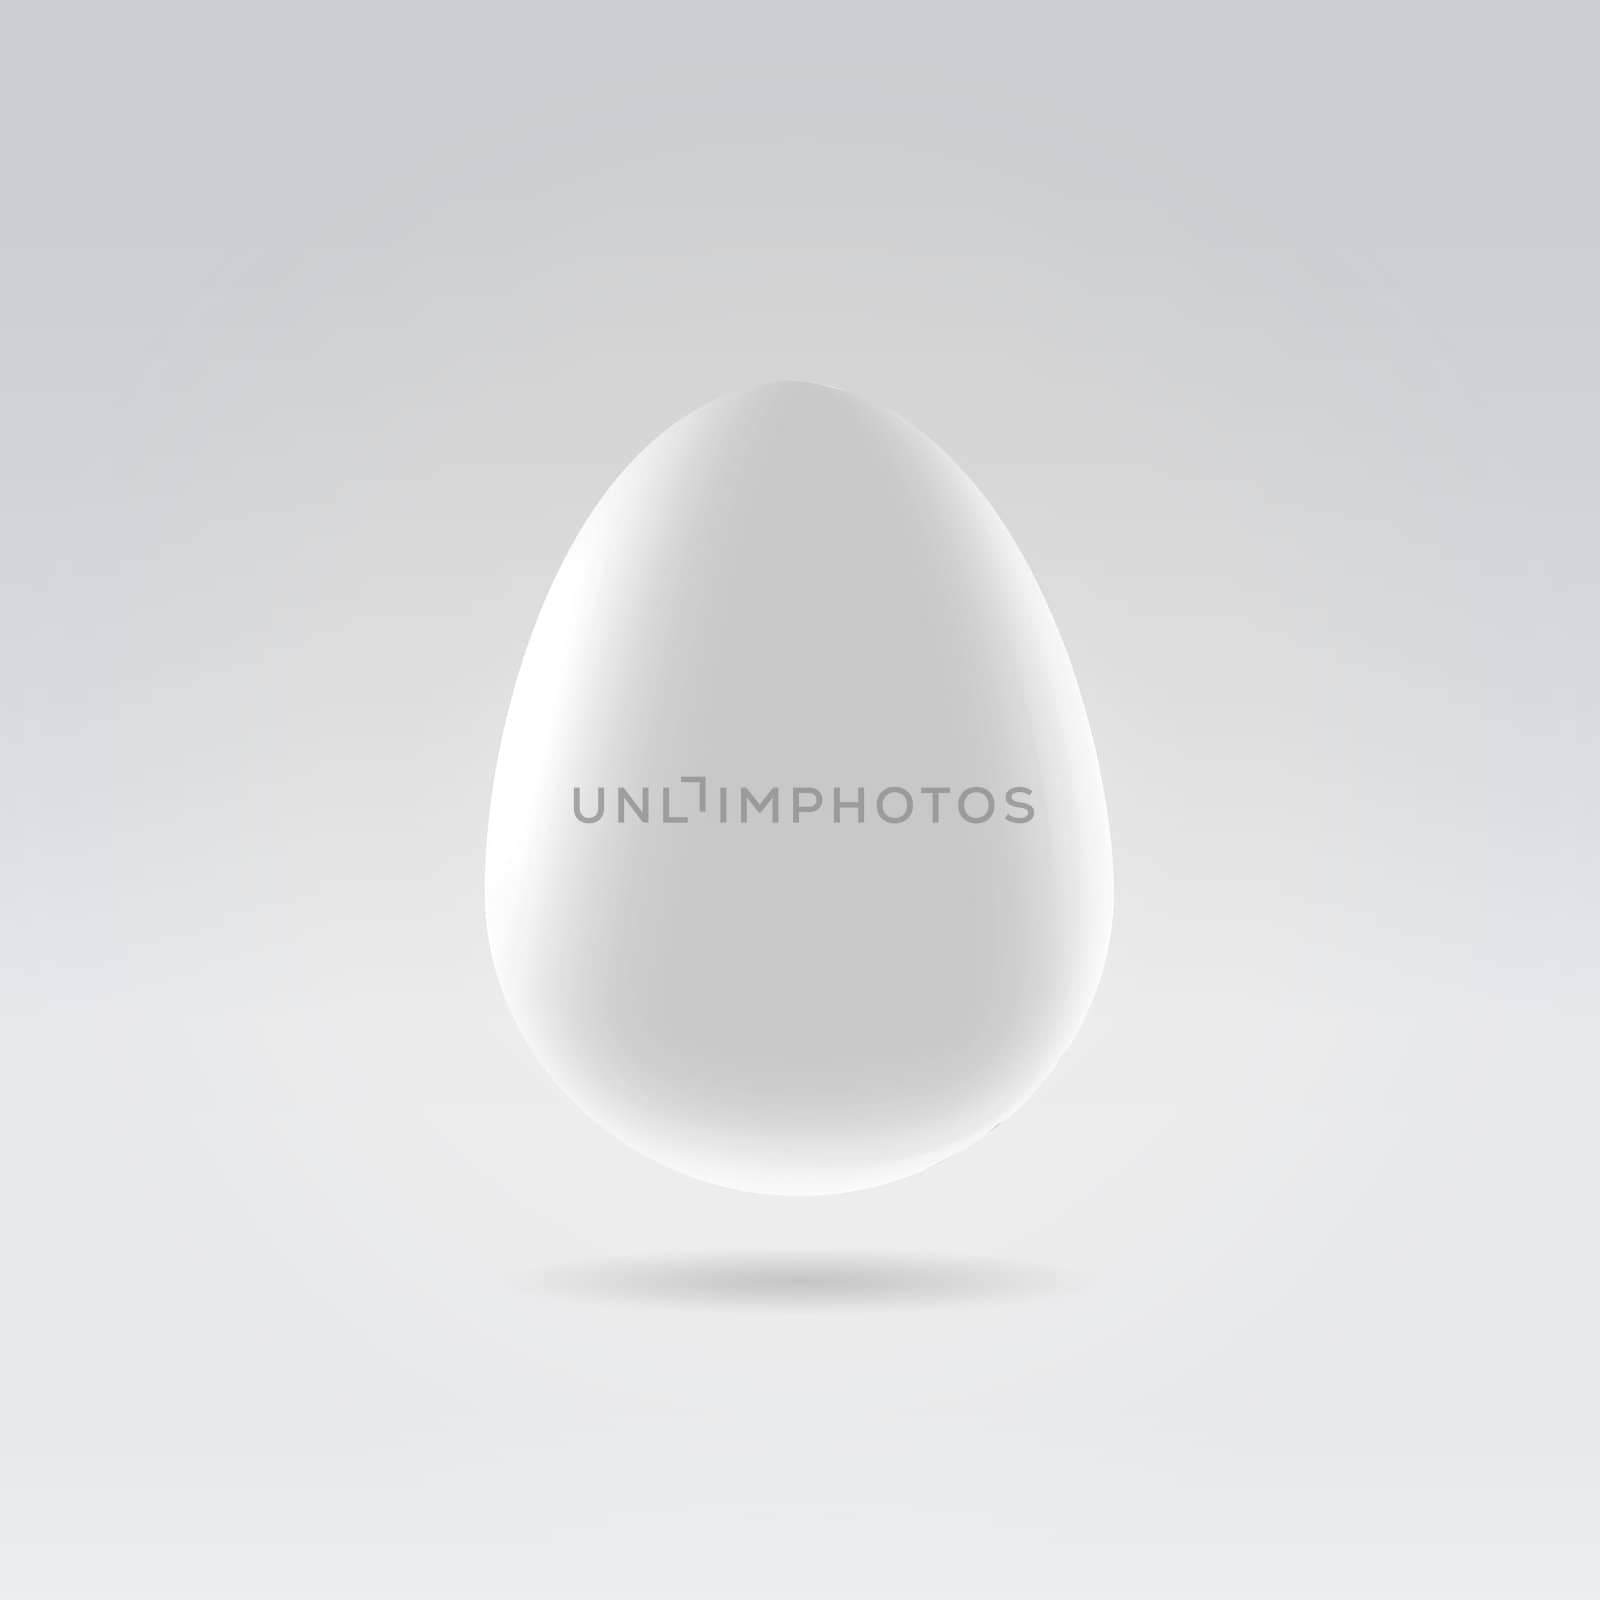 Pure white egg hanging in space studio closeup illustration